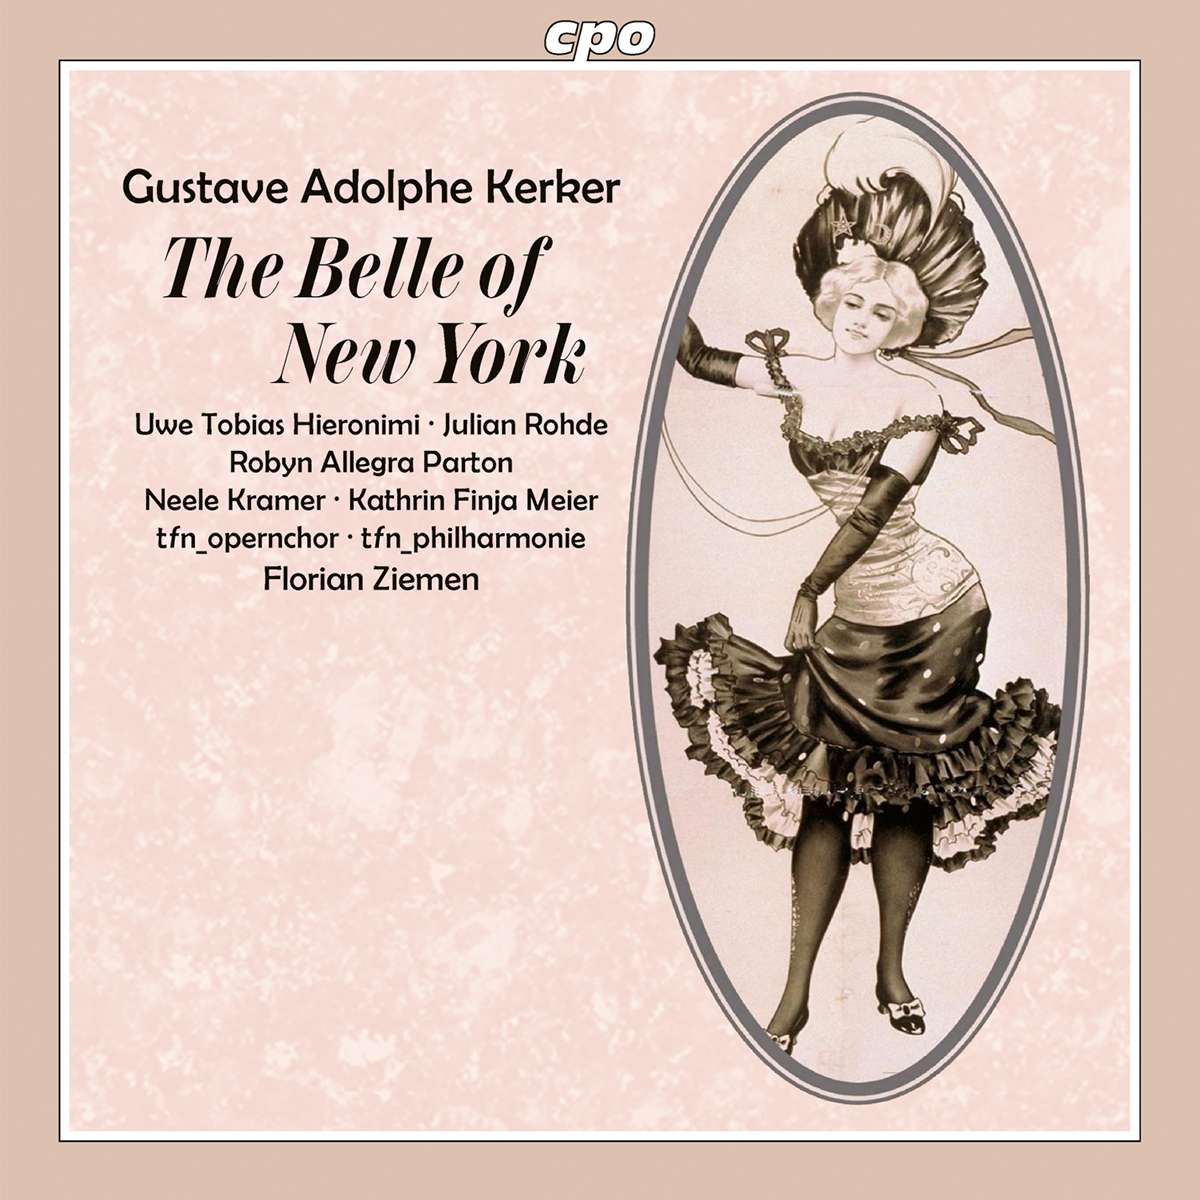 CD cover for "The Belle of New York" conducted by Florian Ziemen. (Photo: cpo)